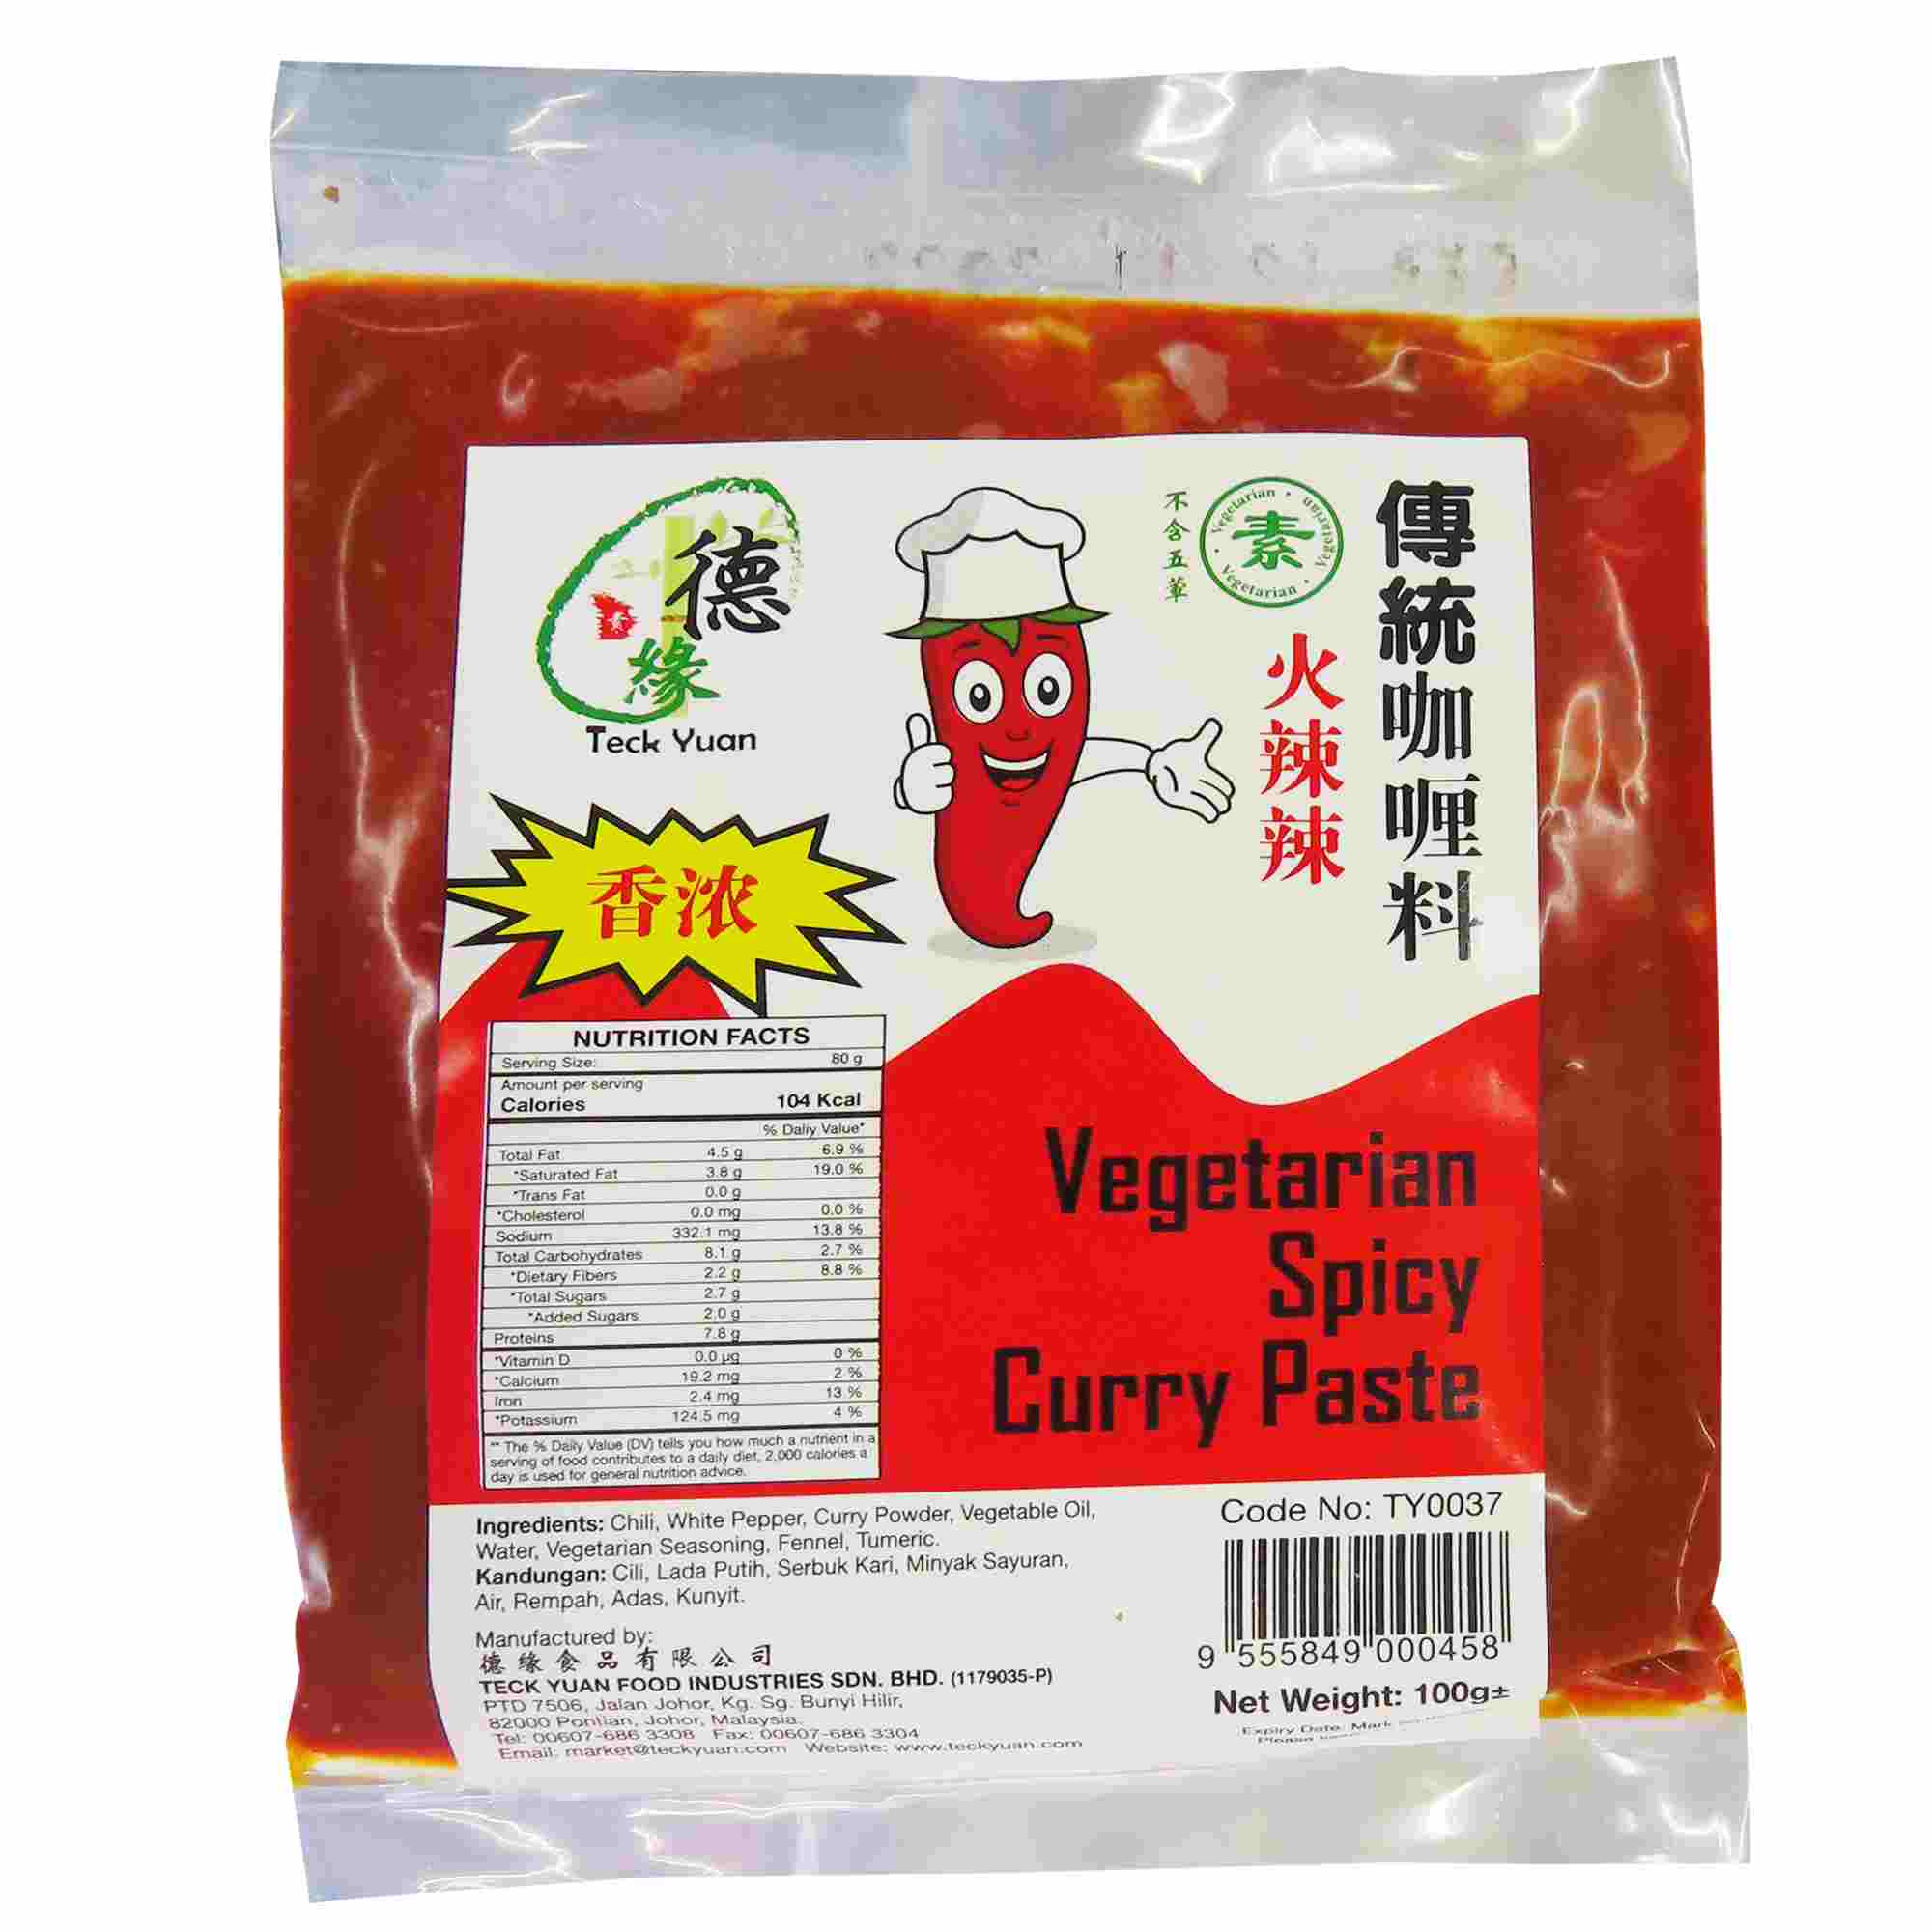 Image Vegetarian Spicy Curry Paste 德缘 - 火辣辣传统咖喱料 100grams